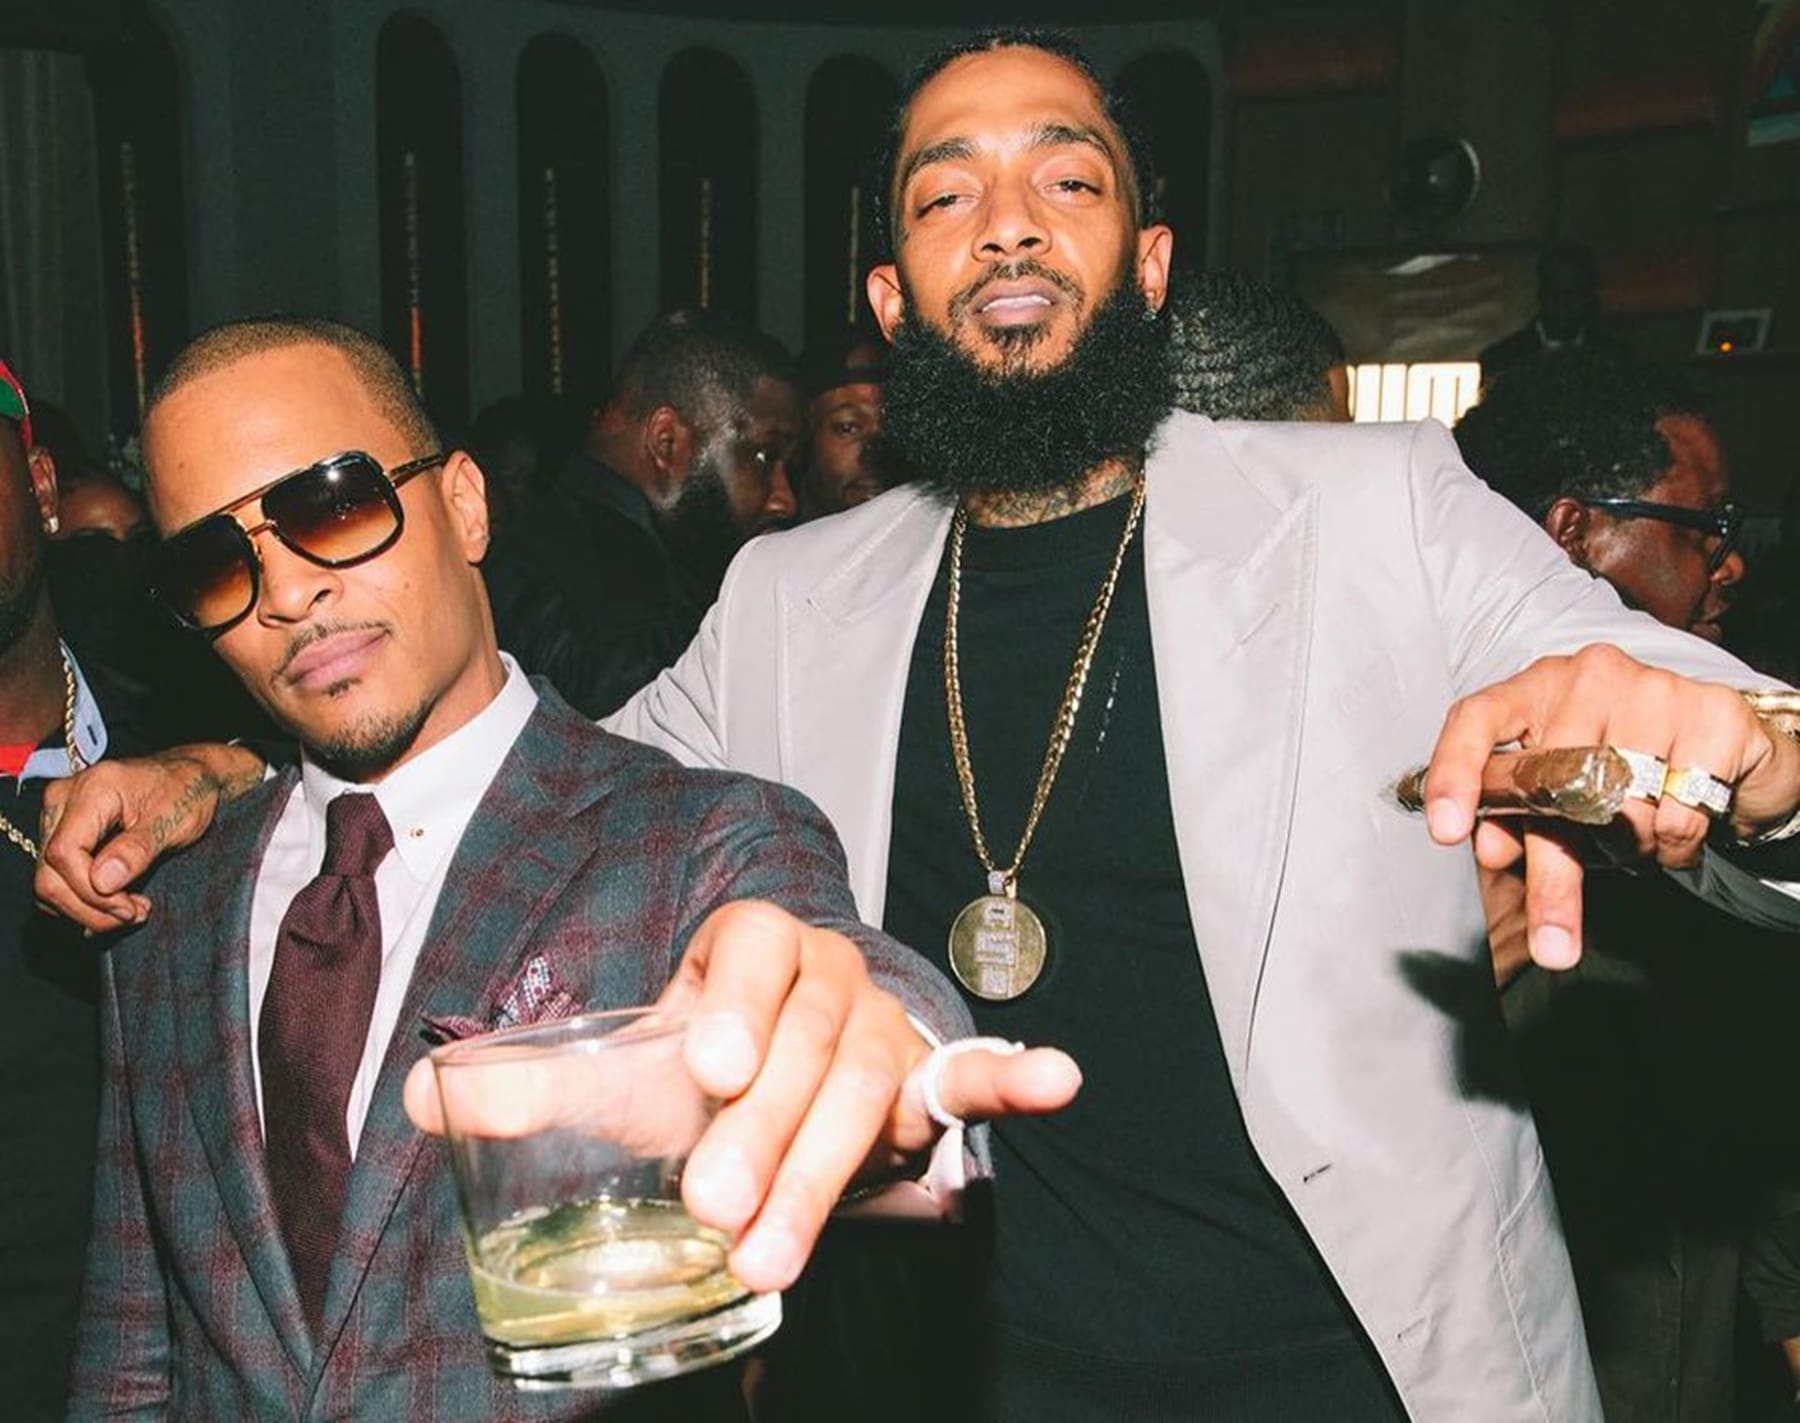 T.I. Shares A Message In The Memory Of Nipsey Hussle And A Video Of The Late Rapper - YFN Lucci Is Here For This